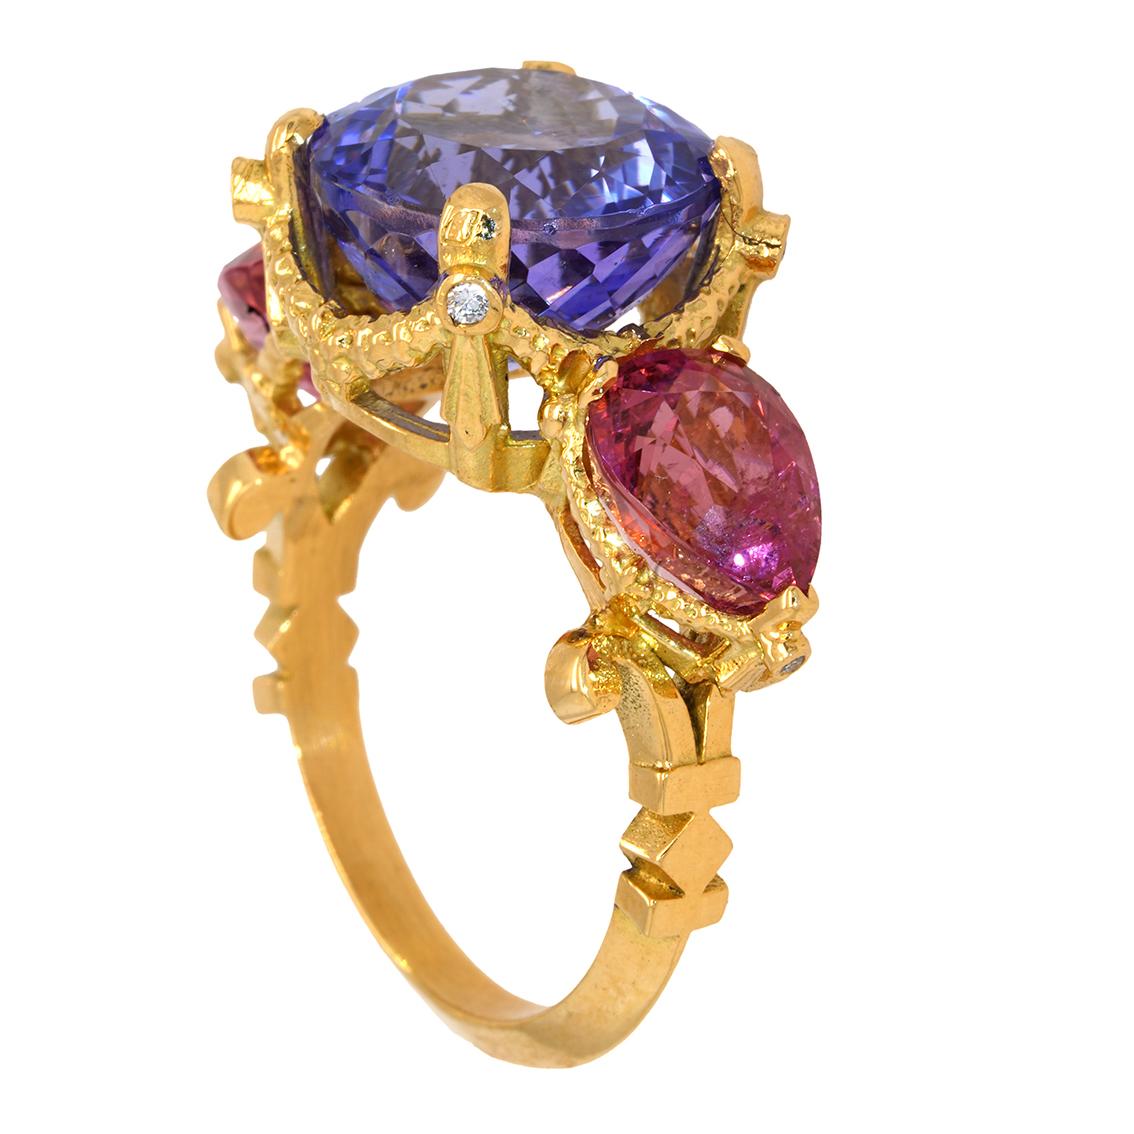 Intricately handcrafted in 18kt yellow gold this exquisite ring features a breathtaking round rich blue violet colored tanzanite aloft a signature William Llewellyn Griffiths garland setting studded with four 1.4mm round brilliant cut white